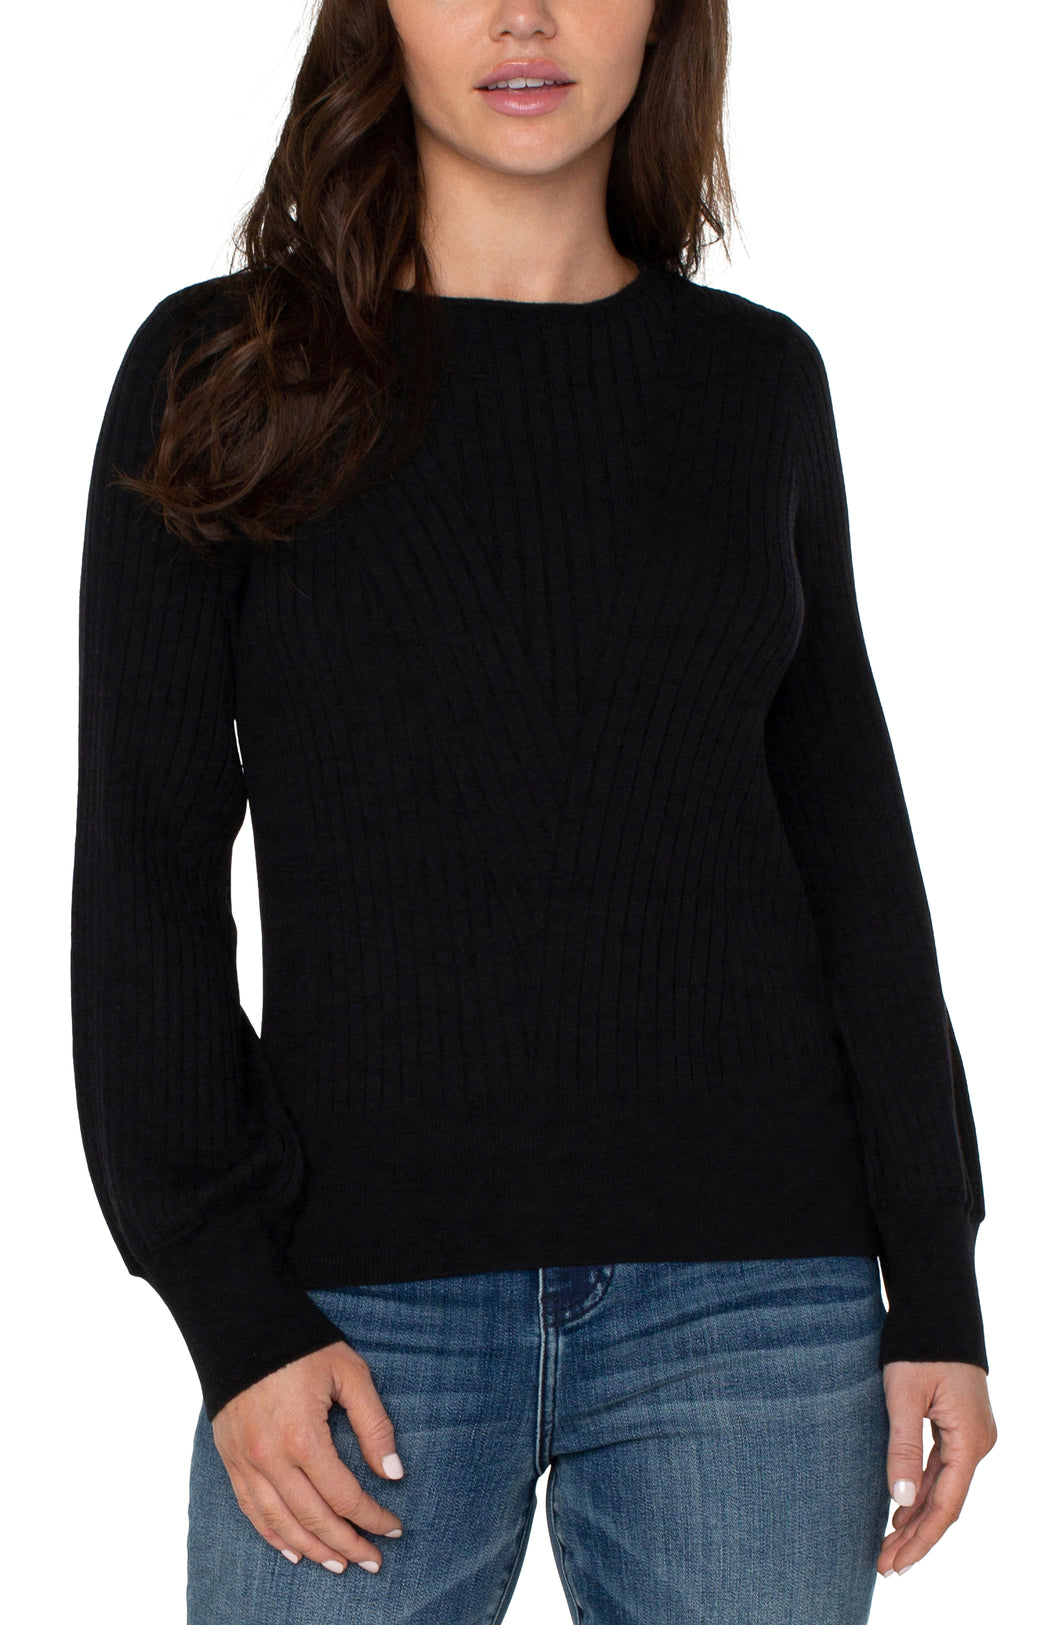 Long Sleeve Ribbed Crew Neck Sweater